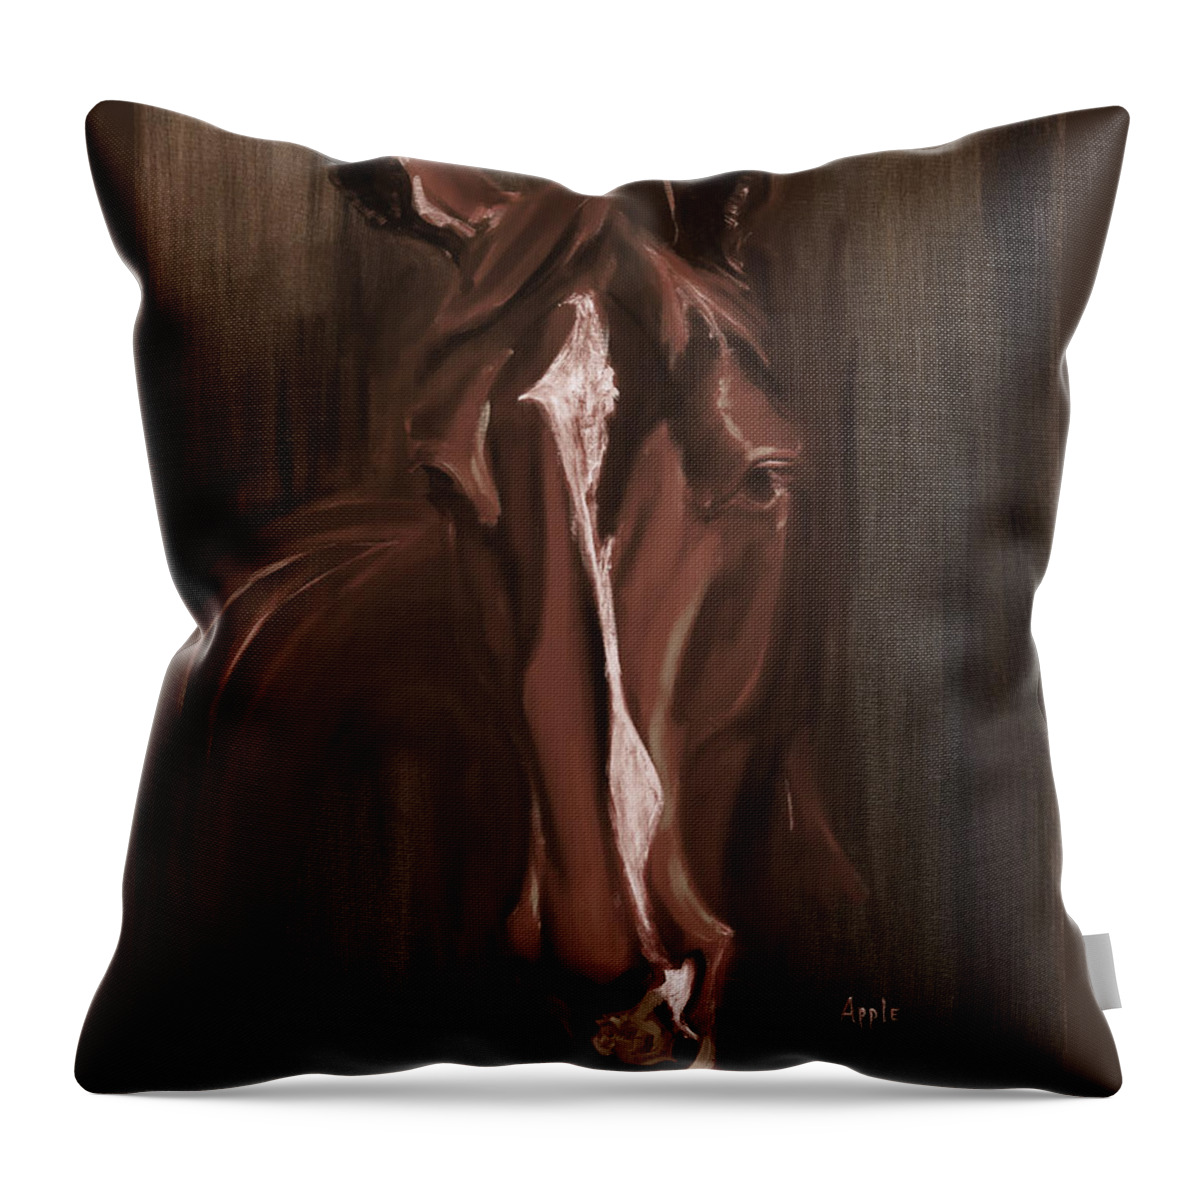 Horse Throw Pillow featuring the painting Horse Apple warm brown by Go Van Kampen